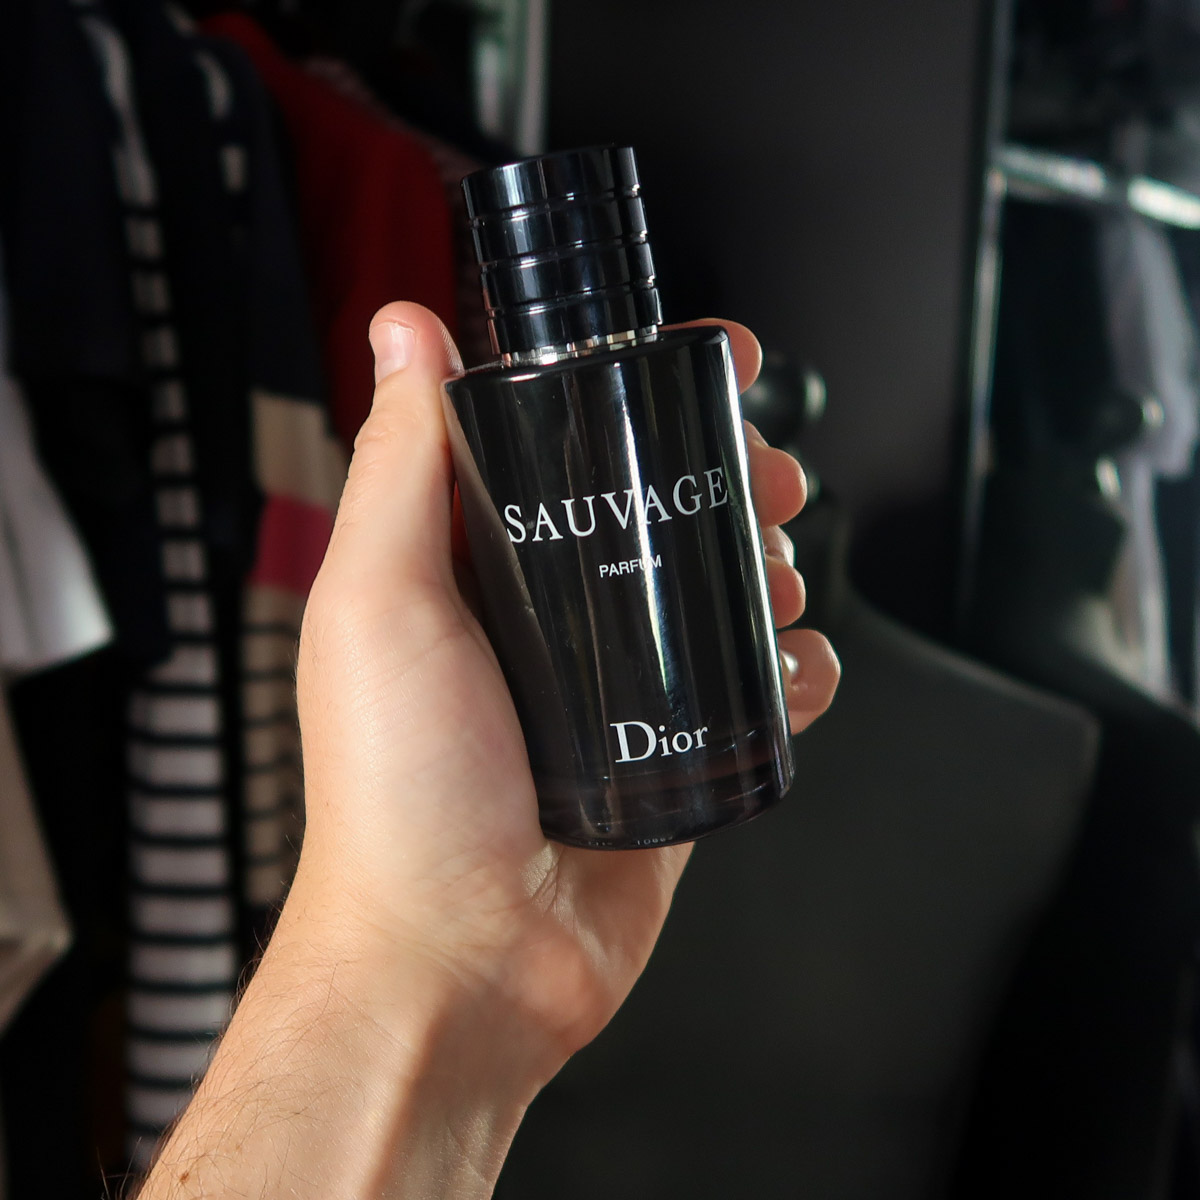 dior-sauvage-parfum-review-man-for-himself